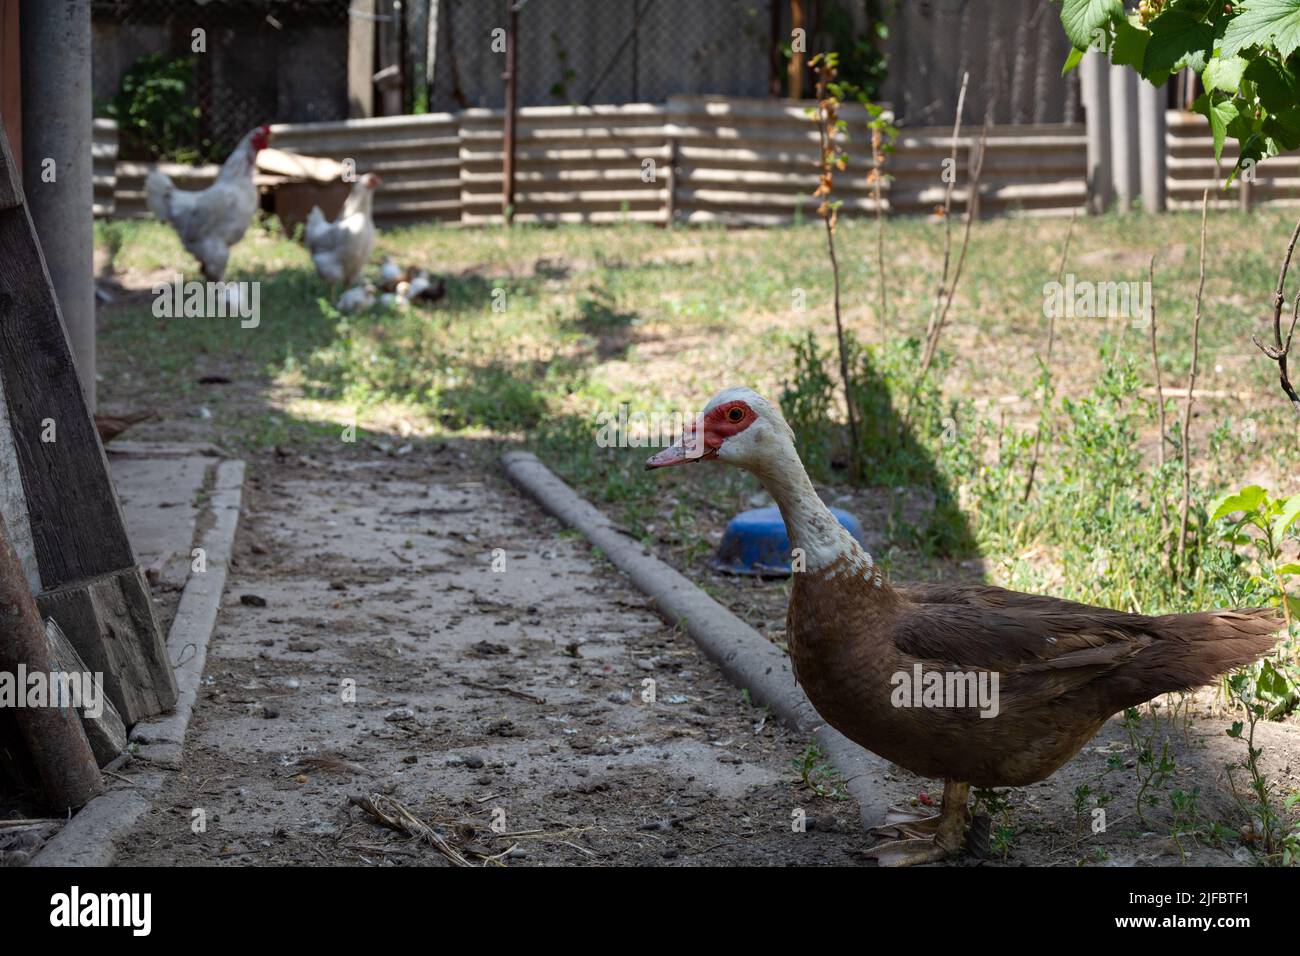 Indo duck. A young indo duck walks in the backyard in the shade. Stock Photo